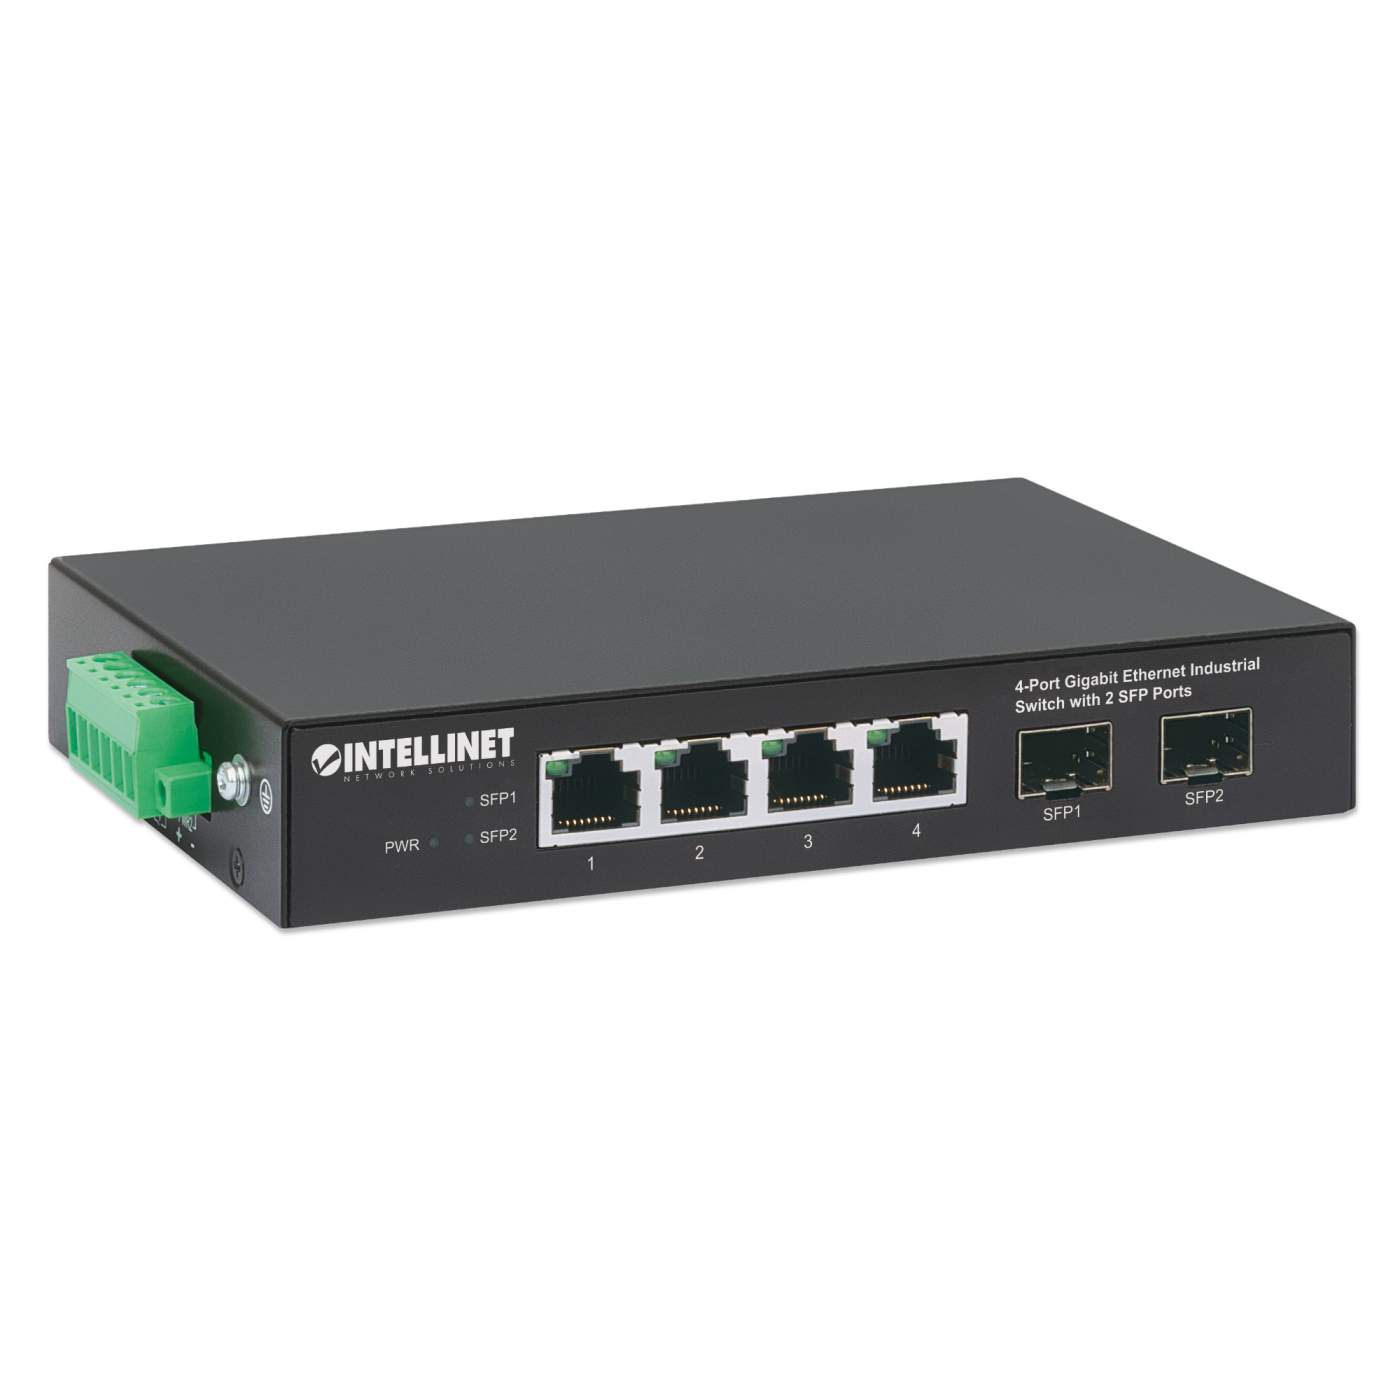 Industrial 4-Port Gigabit Ethernet Switch with 2 SFP Ports Image 3